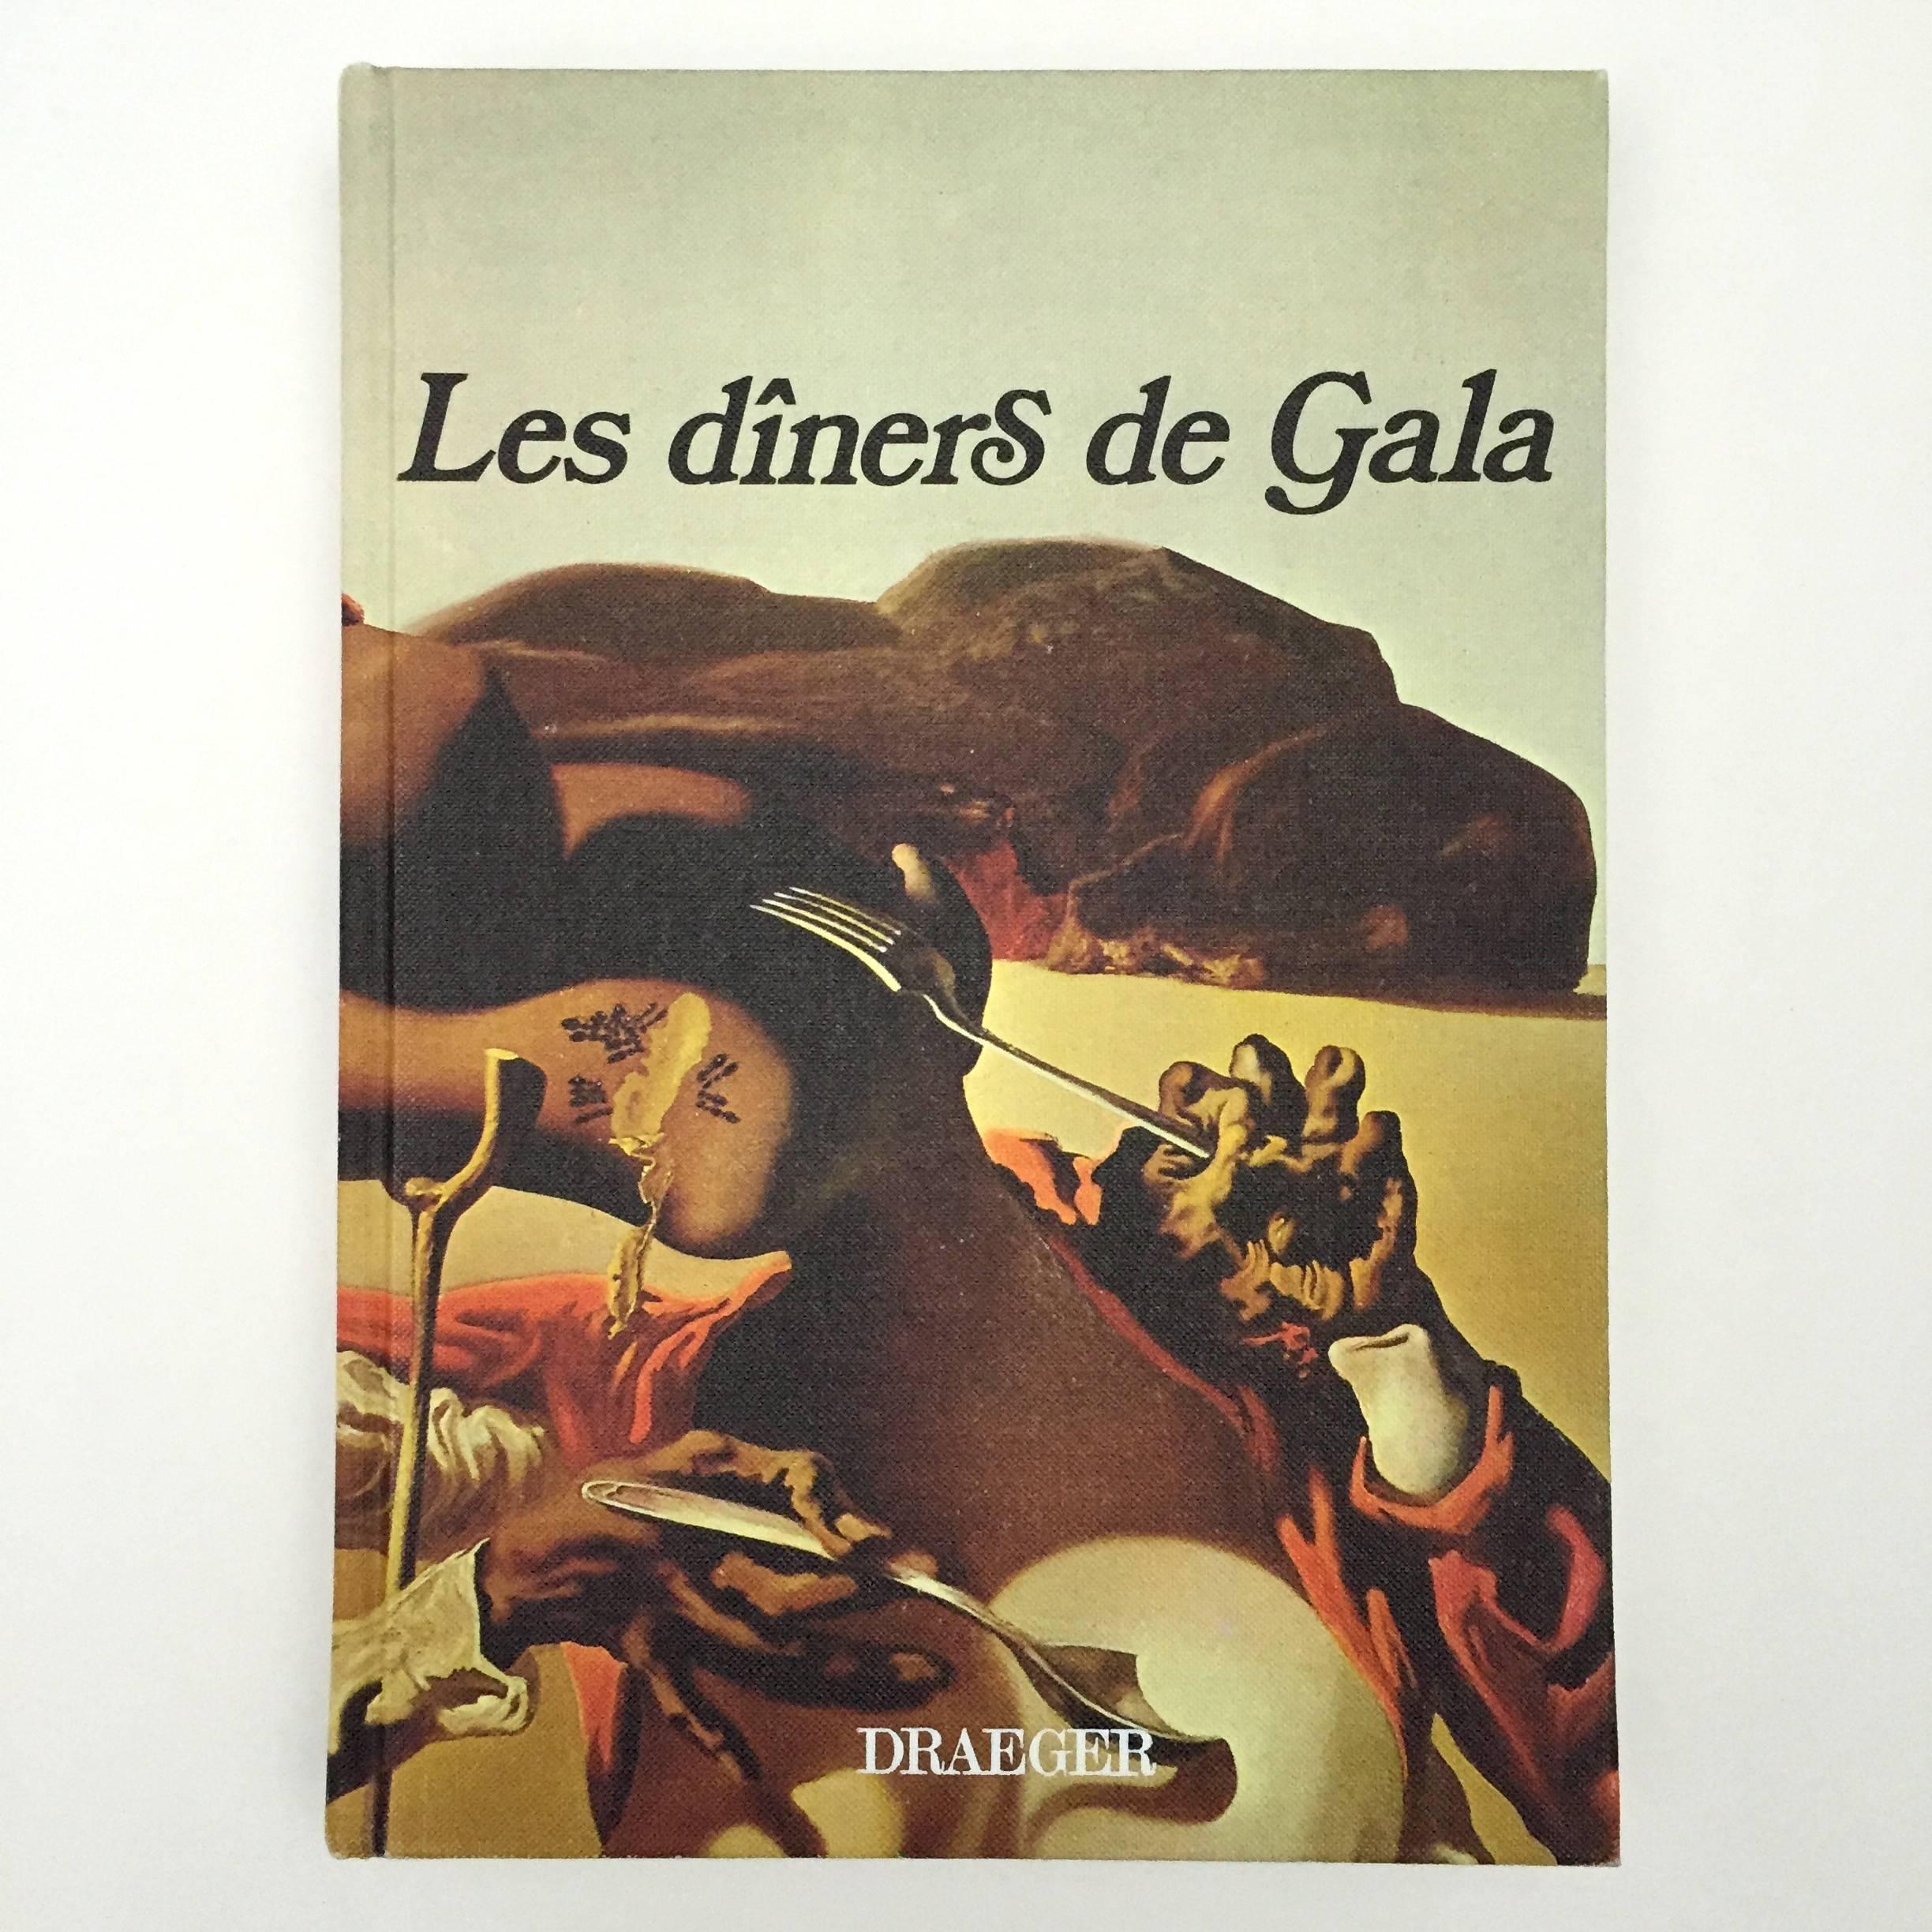 First edition, published by Draeger, 1973.

Salvador Dali's cookery book is full of extraordinary recipes always spectacular. 